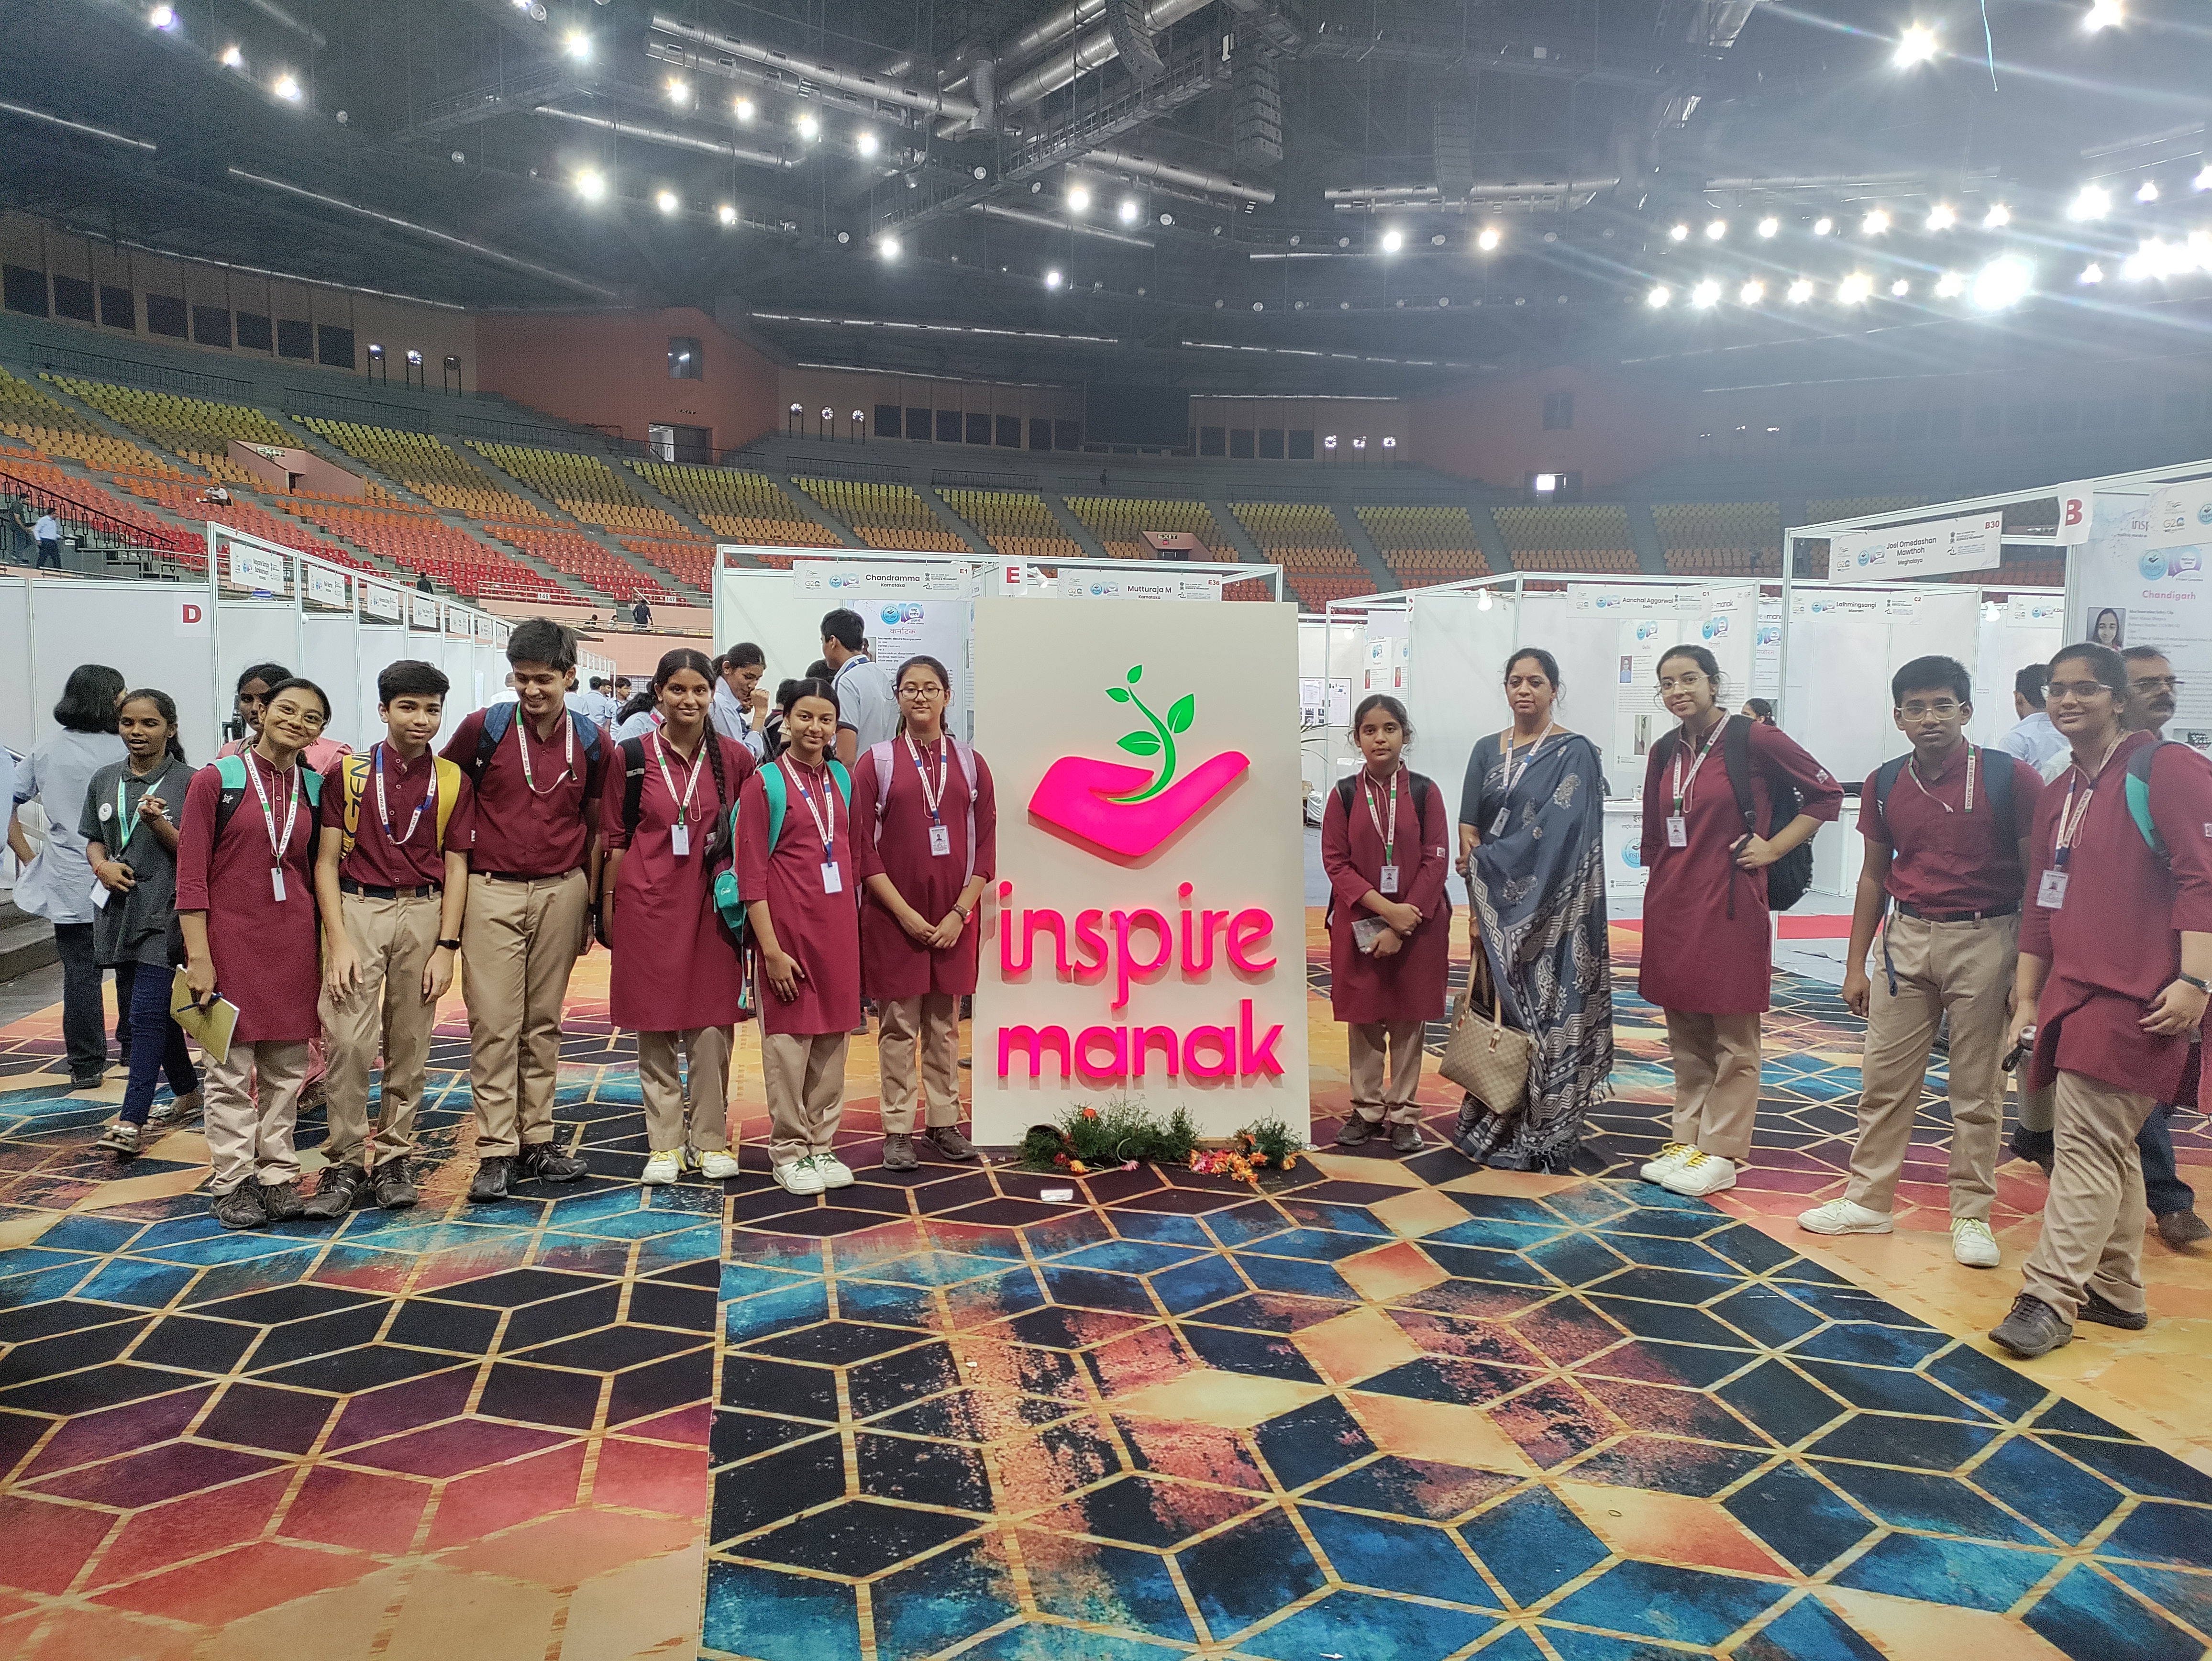 Class 9 visits national level exhibition organised by the DST